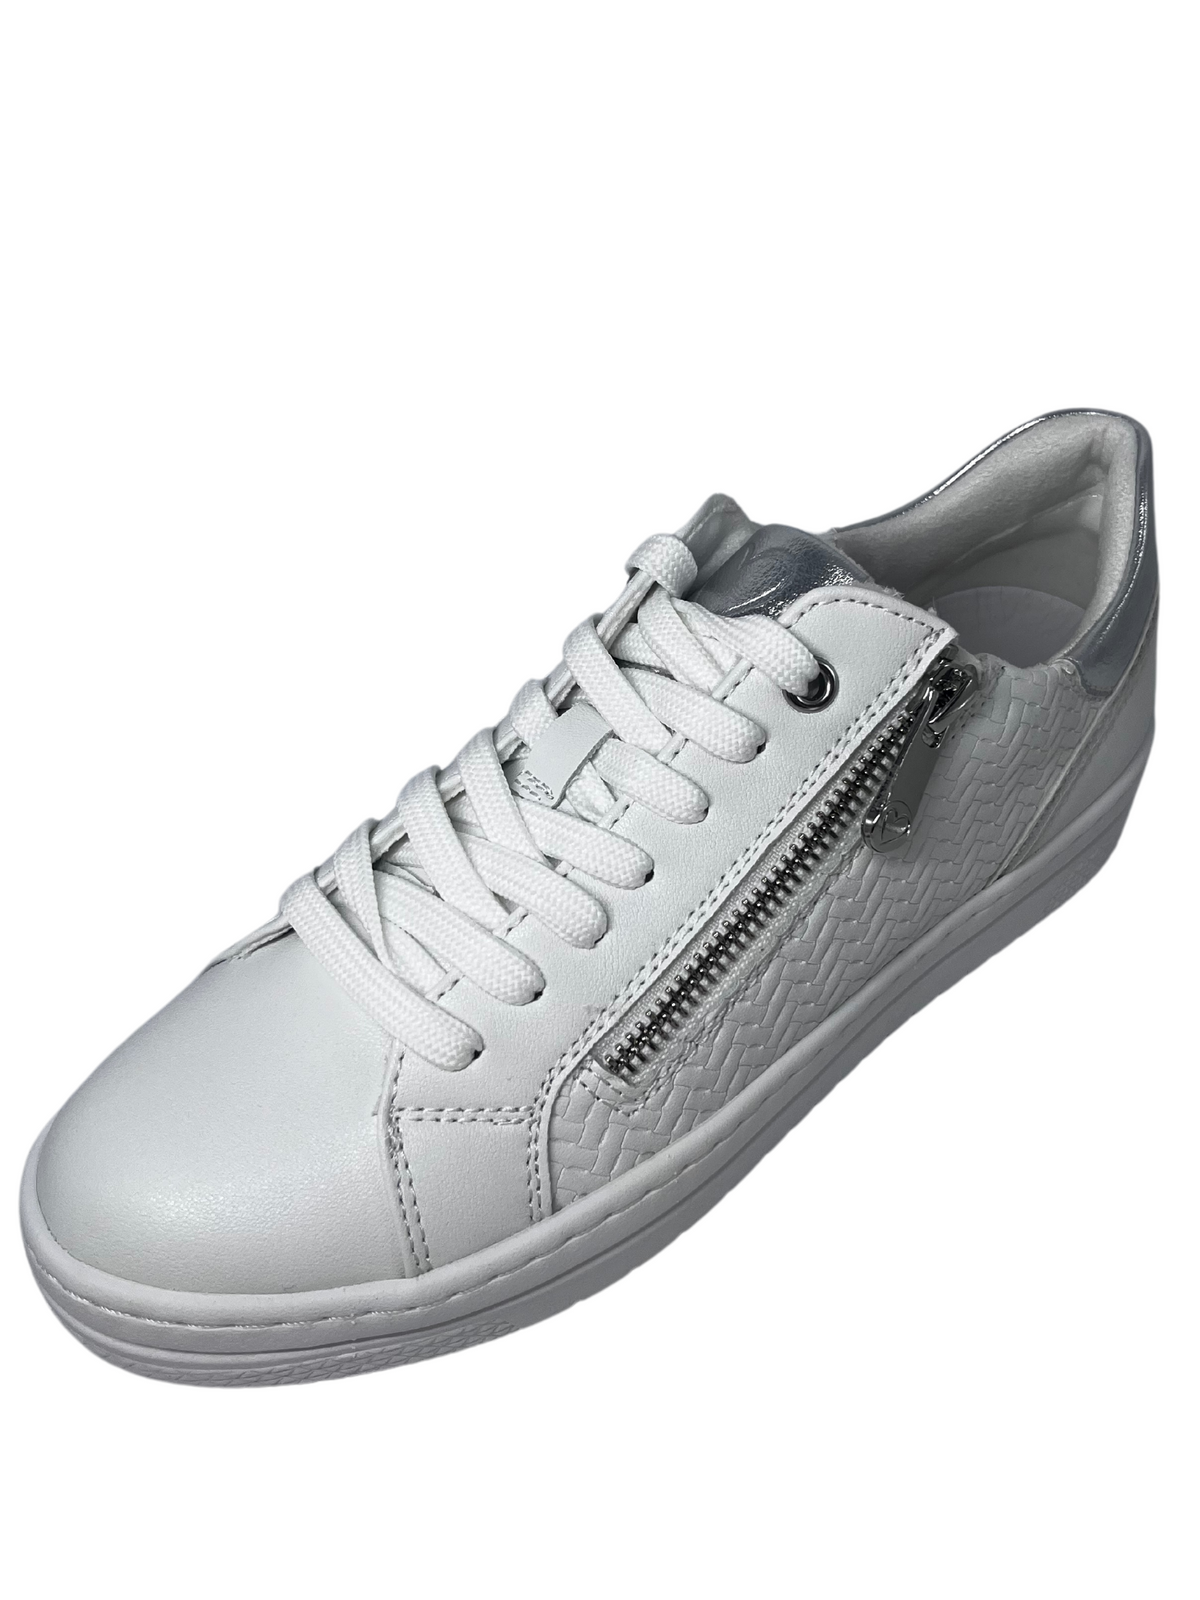 Marco Tozzi White Trainer With Woven Design On side